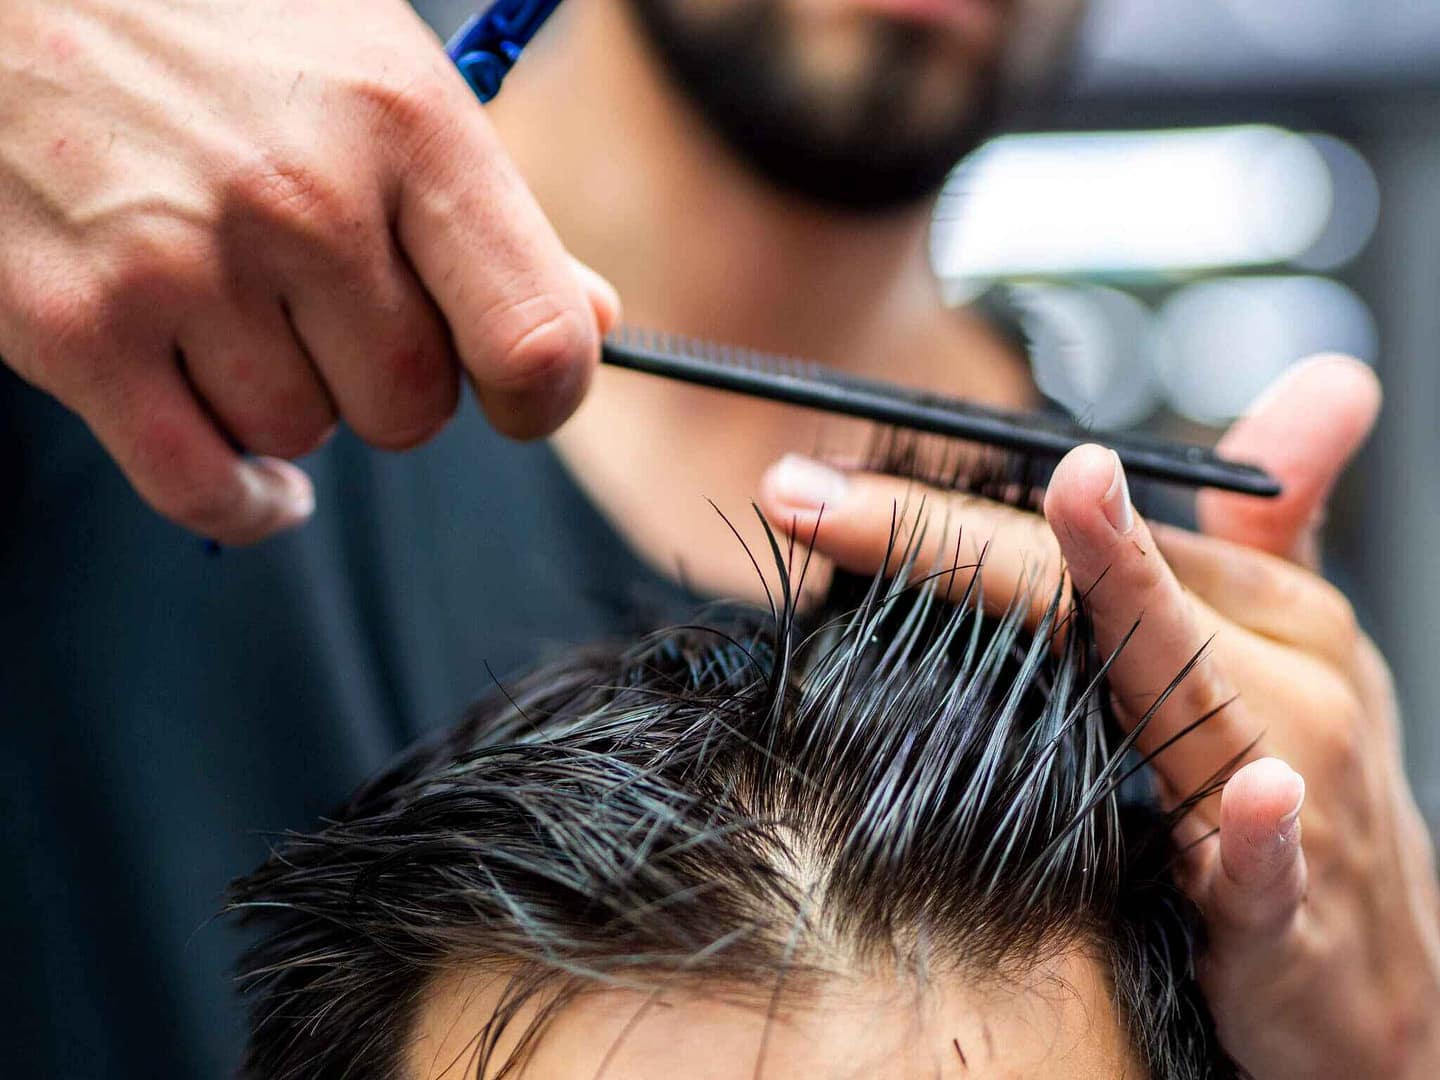 Can You Cut Wet Hair With Clippers?